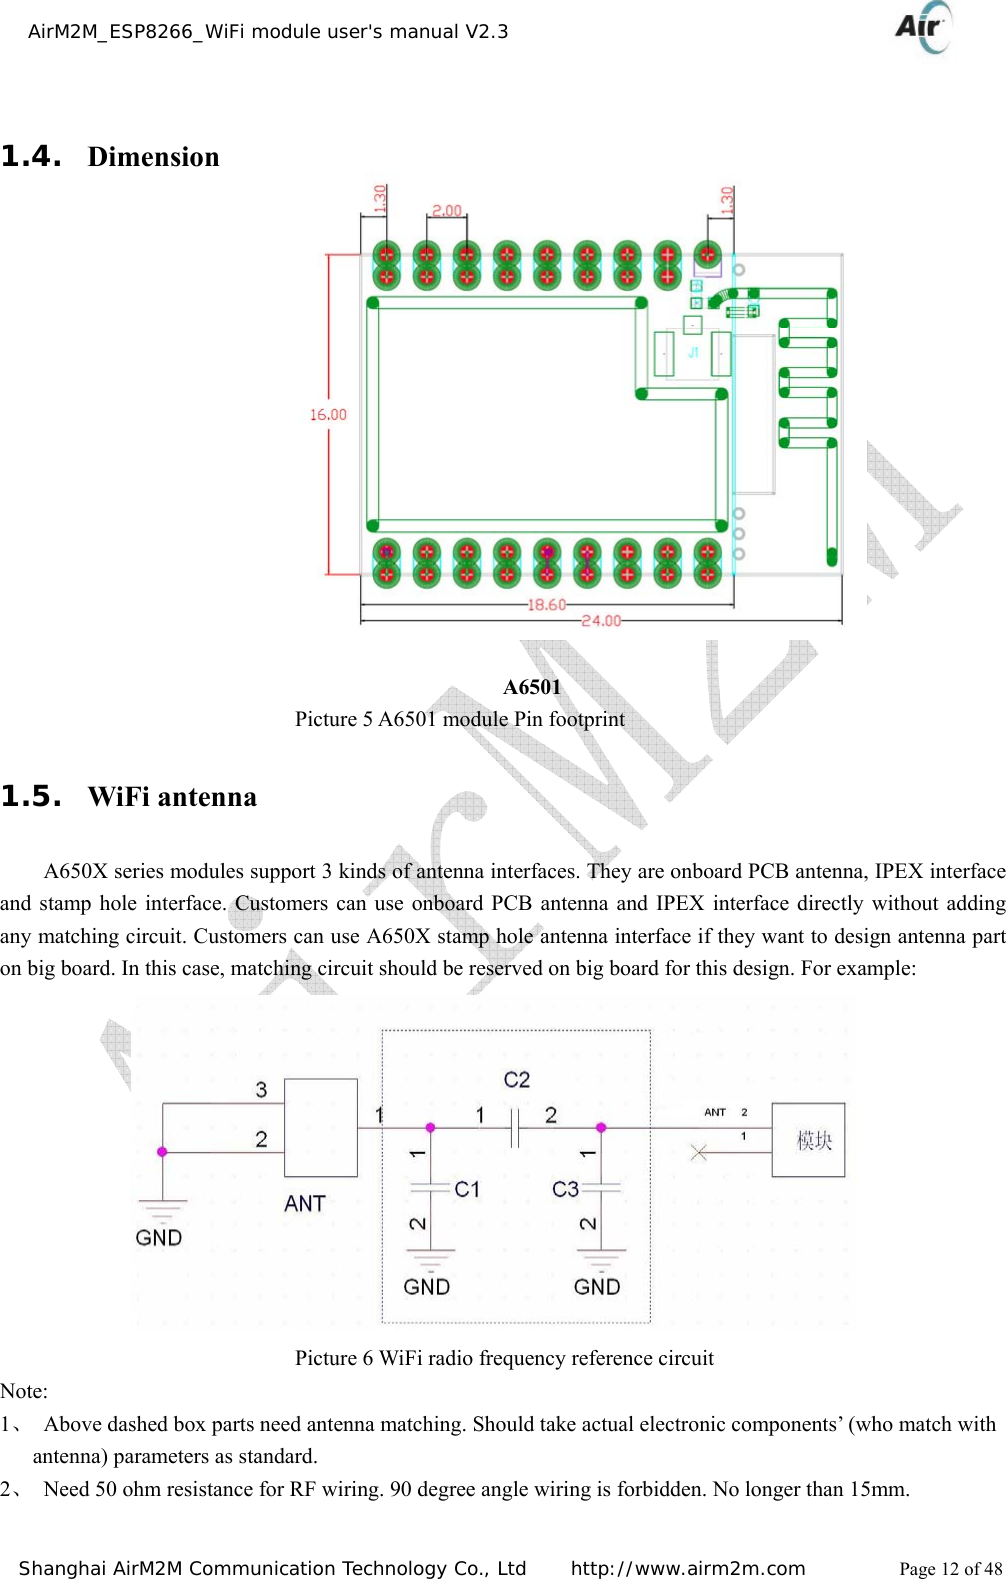    AirM2M_ESP8266_WiFi module user&apos;s manual V2.3   Shanghai AirM2M Communication Technology Co., Ltd     http://www.airm2m.com          Page 12 of 48  1.4. Dimension                                                             A6501                            Picture 5 A6501 module Pin footprint 1.5. WiFi antenna A650X series modules support 3 kinds of antenna interfaces. They are onboard PCB antenna, IPEX interface and stamp hole interface. Customers can use onboard PCB antenna and IPEX interface directly without adding any matching circuit. Customers can use A650X stamp hole antenna interface if they want to design antenna part on big board. In this case, matching circuit should be reserved on big board for this design. For example:                             Picture 6 WiFi radio frequency reference circuit Note:  1、 Above dashed box parts need antenna matching. Should take actual electronic components’ (who match with antenna) parameters as standard. 2、 Need 50 ohm resistance for RF wiring. 90 degree angle wiring is forbidden. No longer than 15mm. 